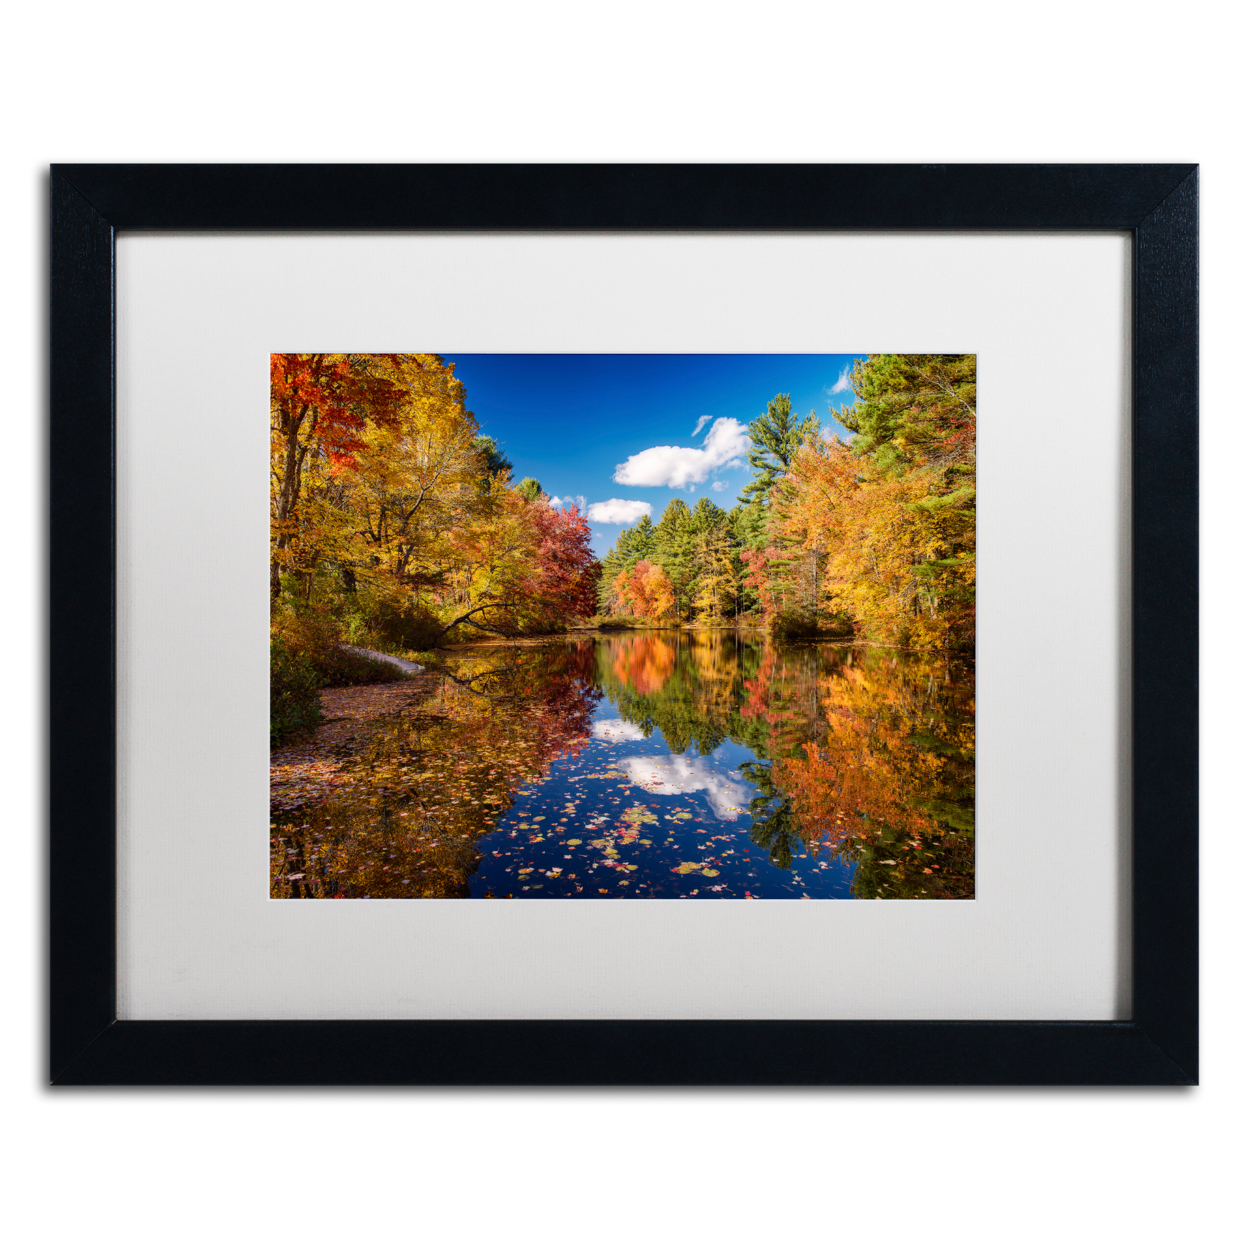 Michael Blanchette Photography 'River Mirage' Black Wooden Framed Art 18 X 22 Inches